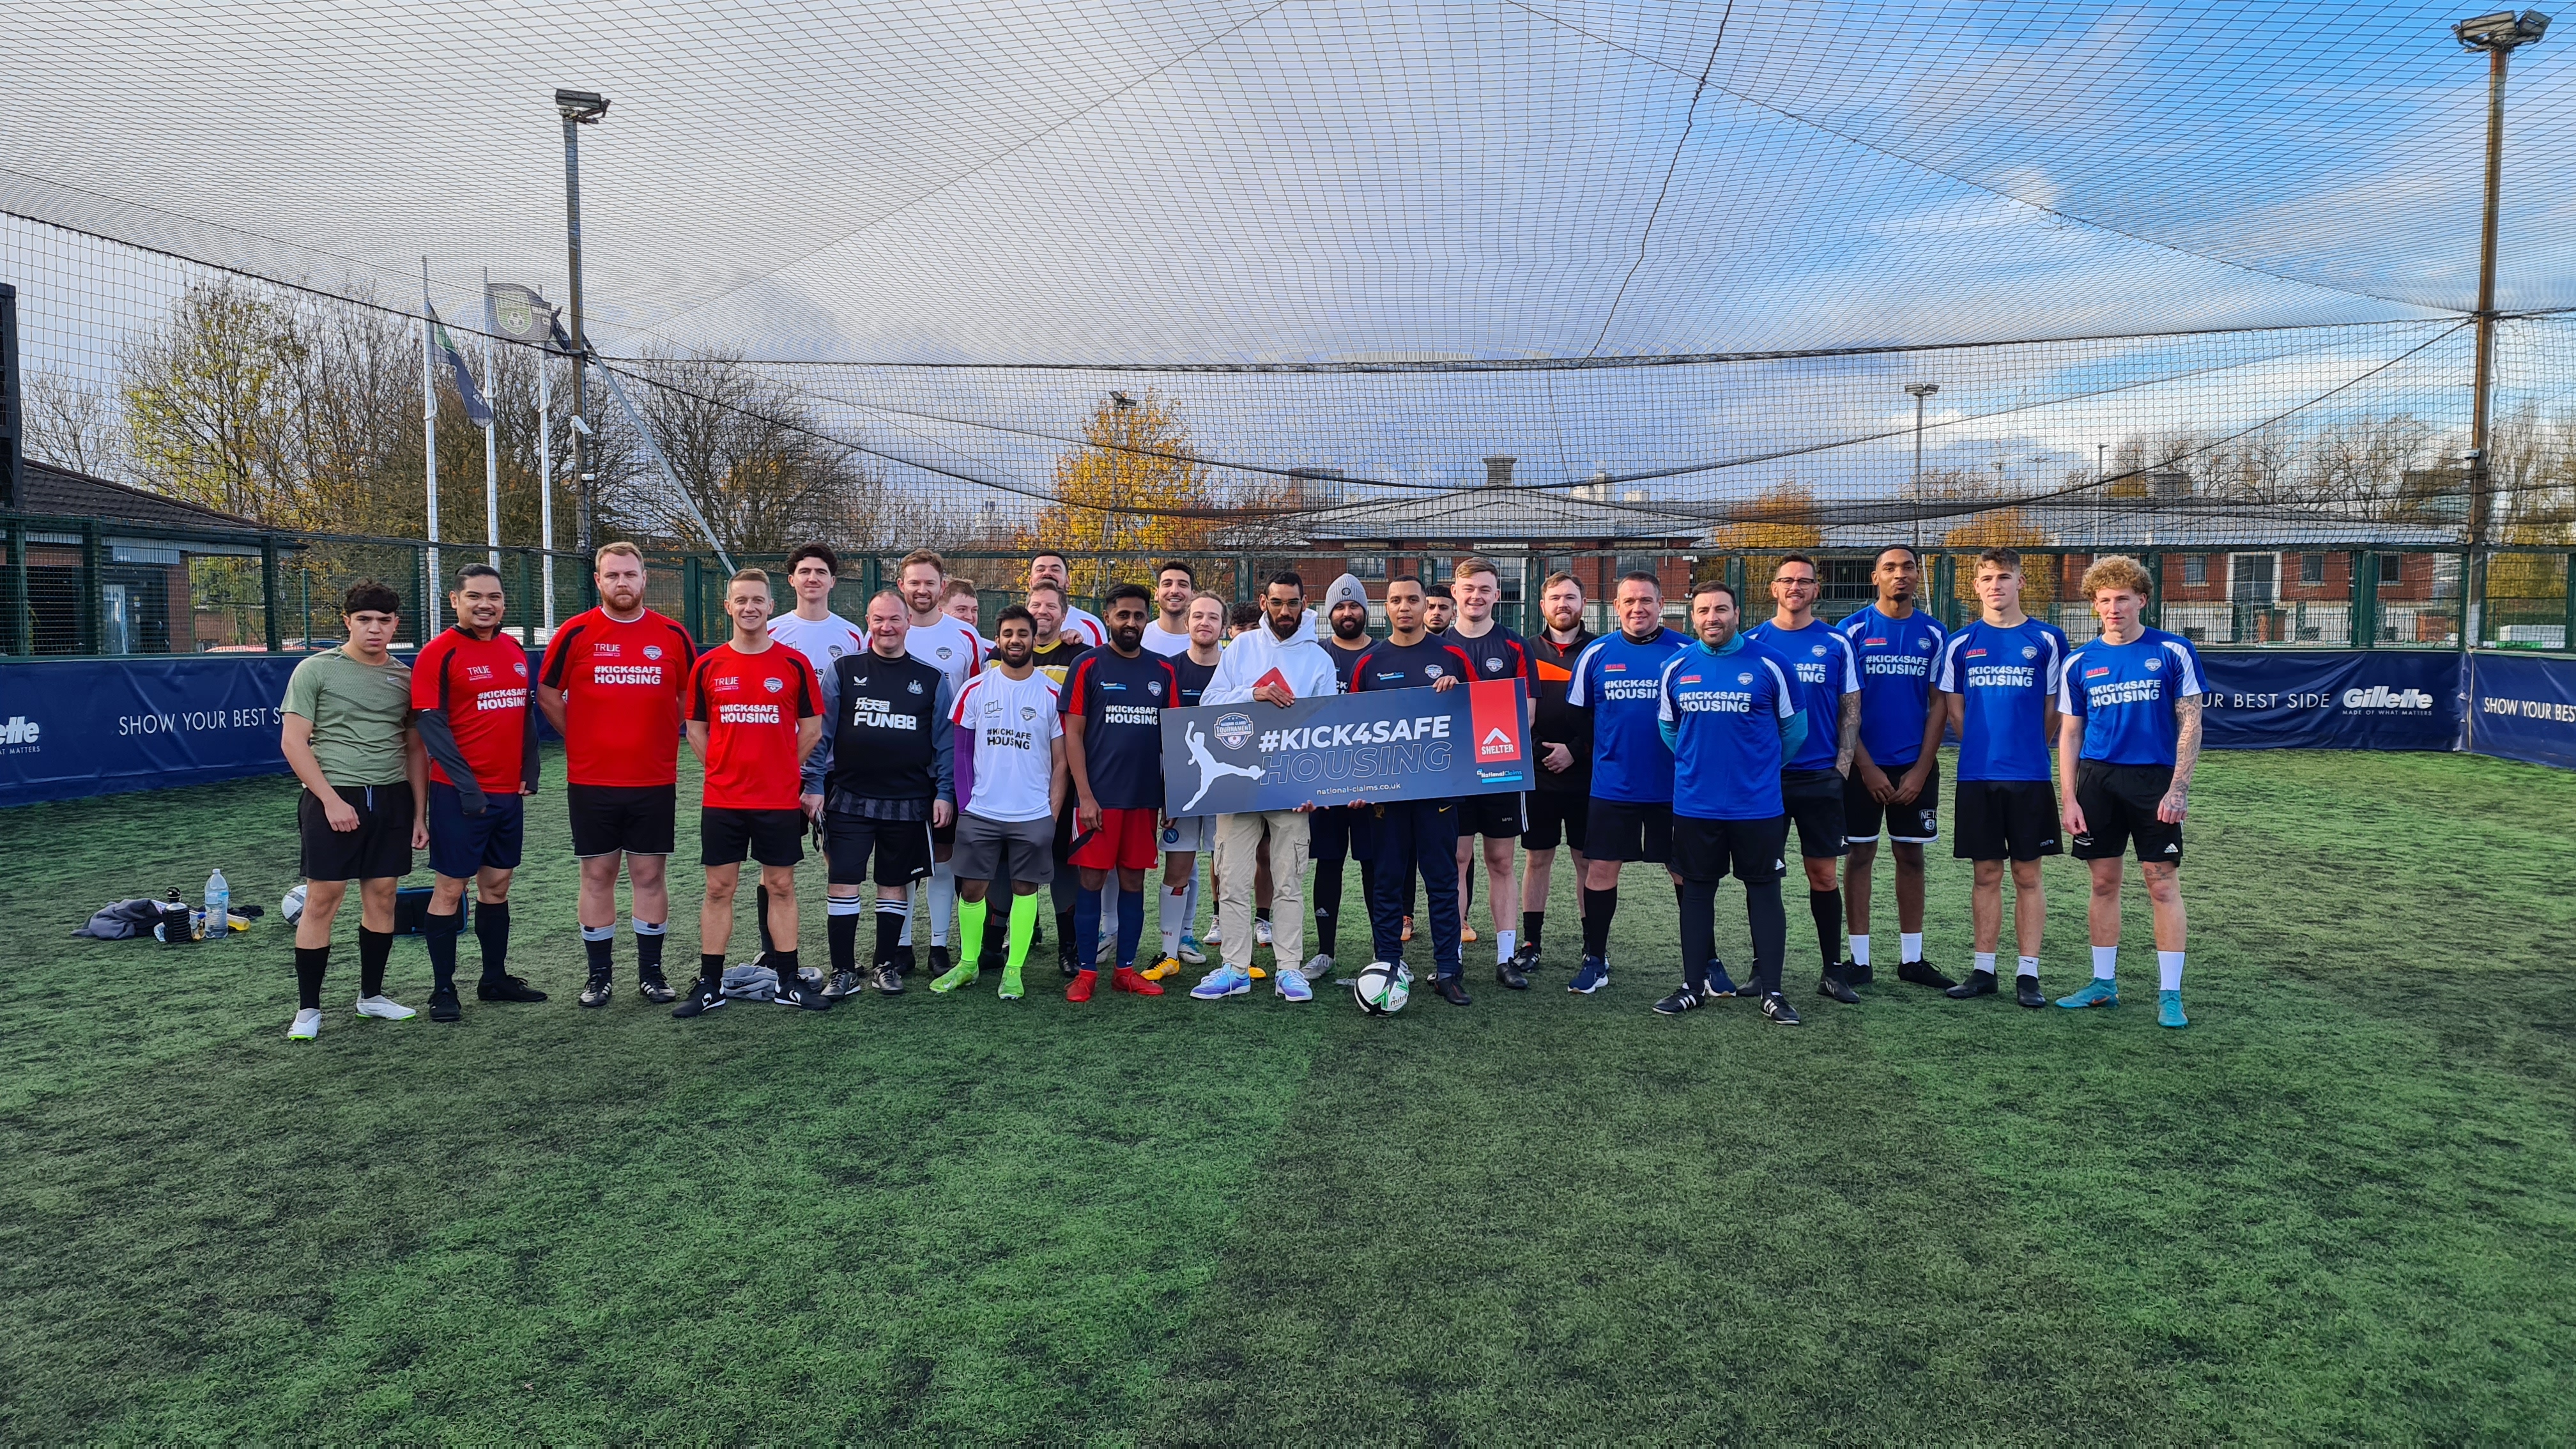 Group photo of every team at the tournament with the #kick4safehousing banner